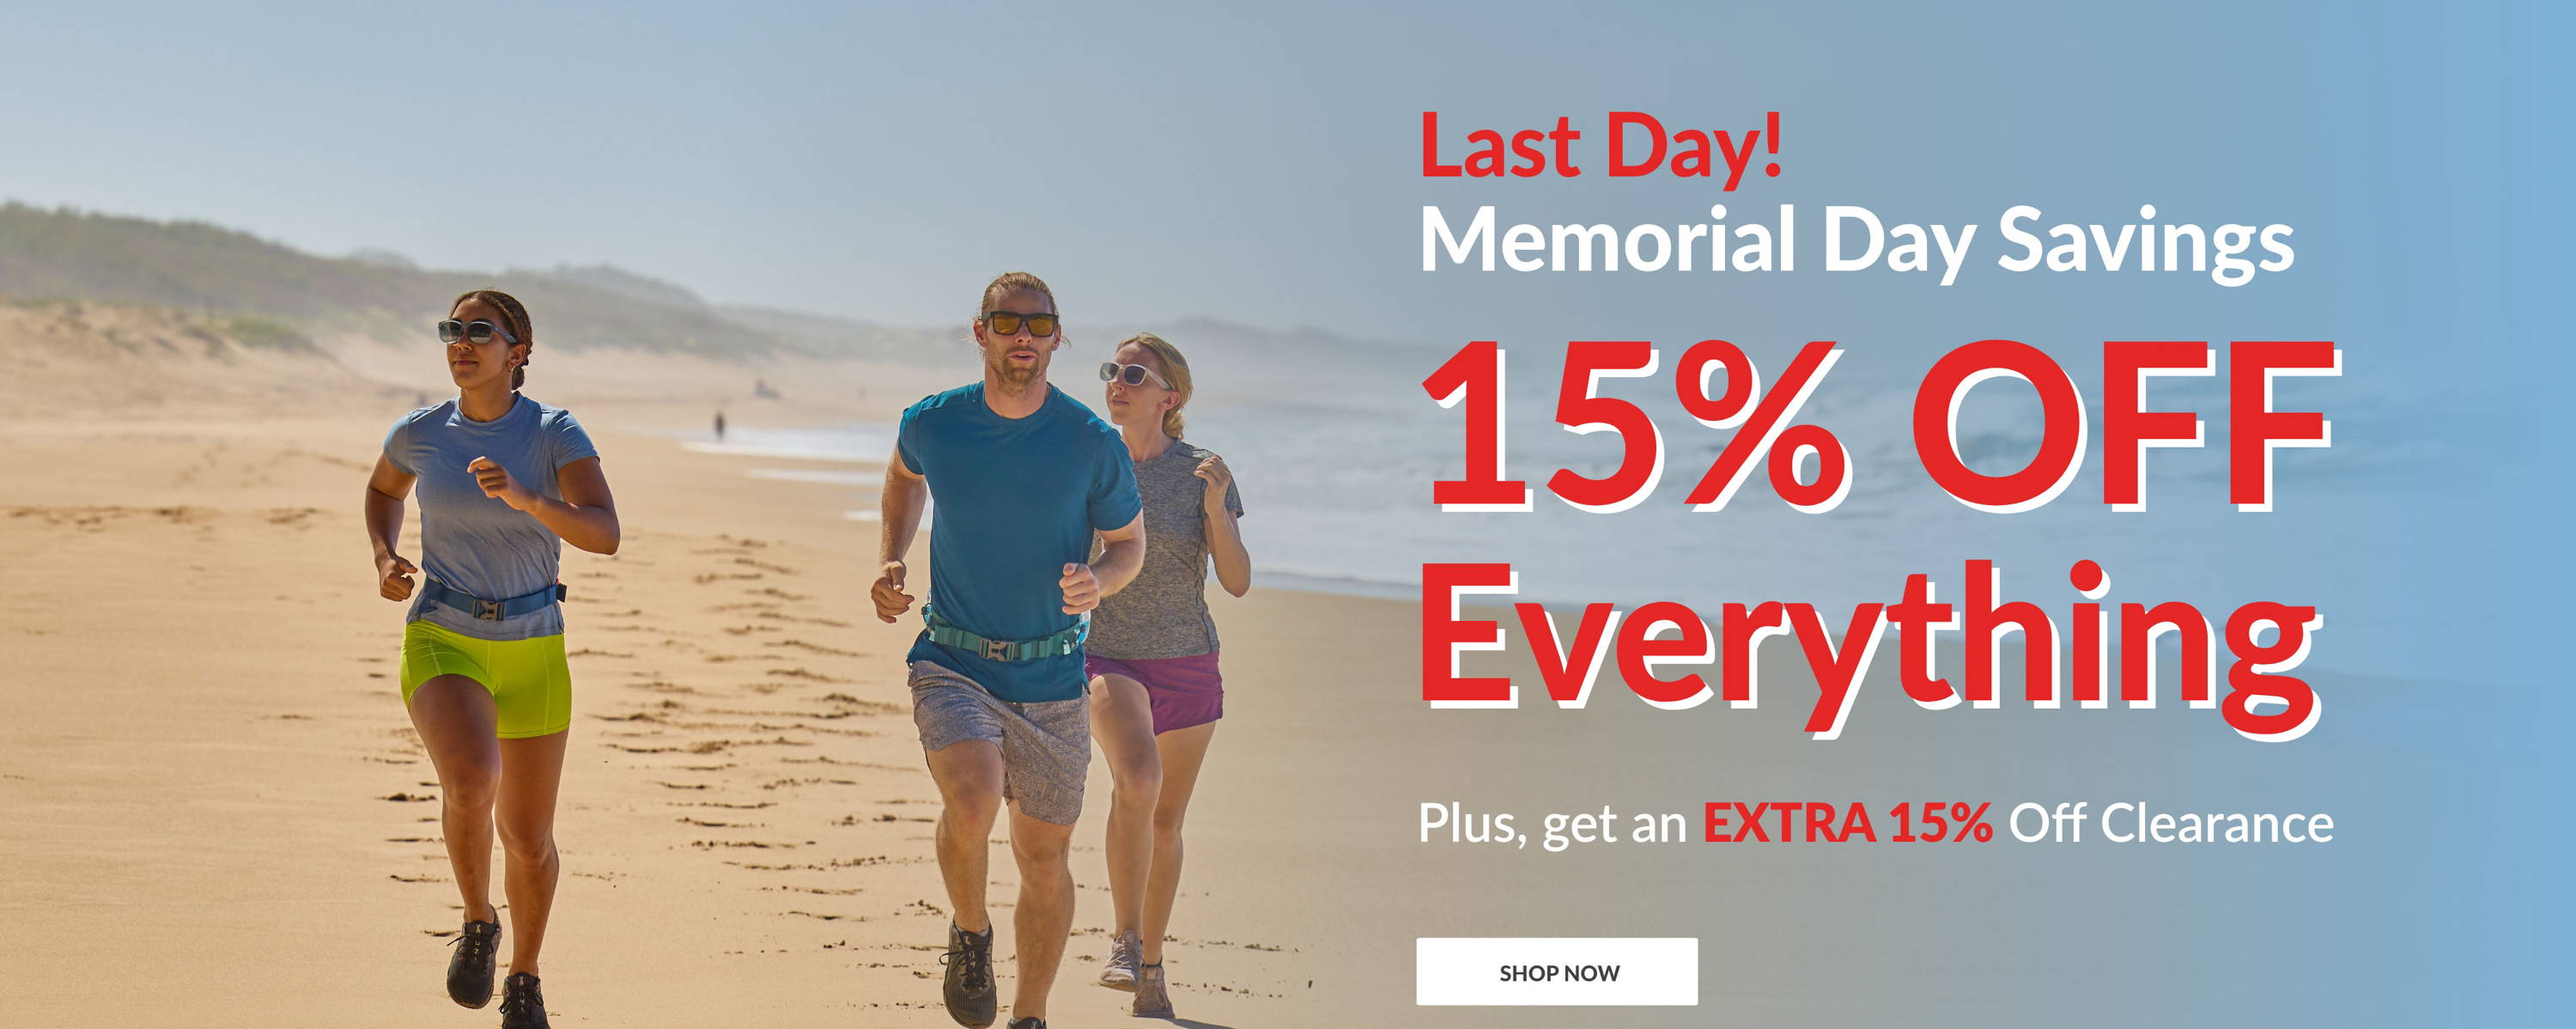 Last Day! Memorial Day Savings Start Now - 15% OFF Everything - Plus, get an EXTRA 15% OFF Clearance  - SHOP NOW